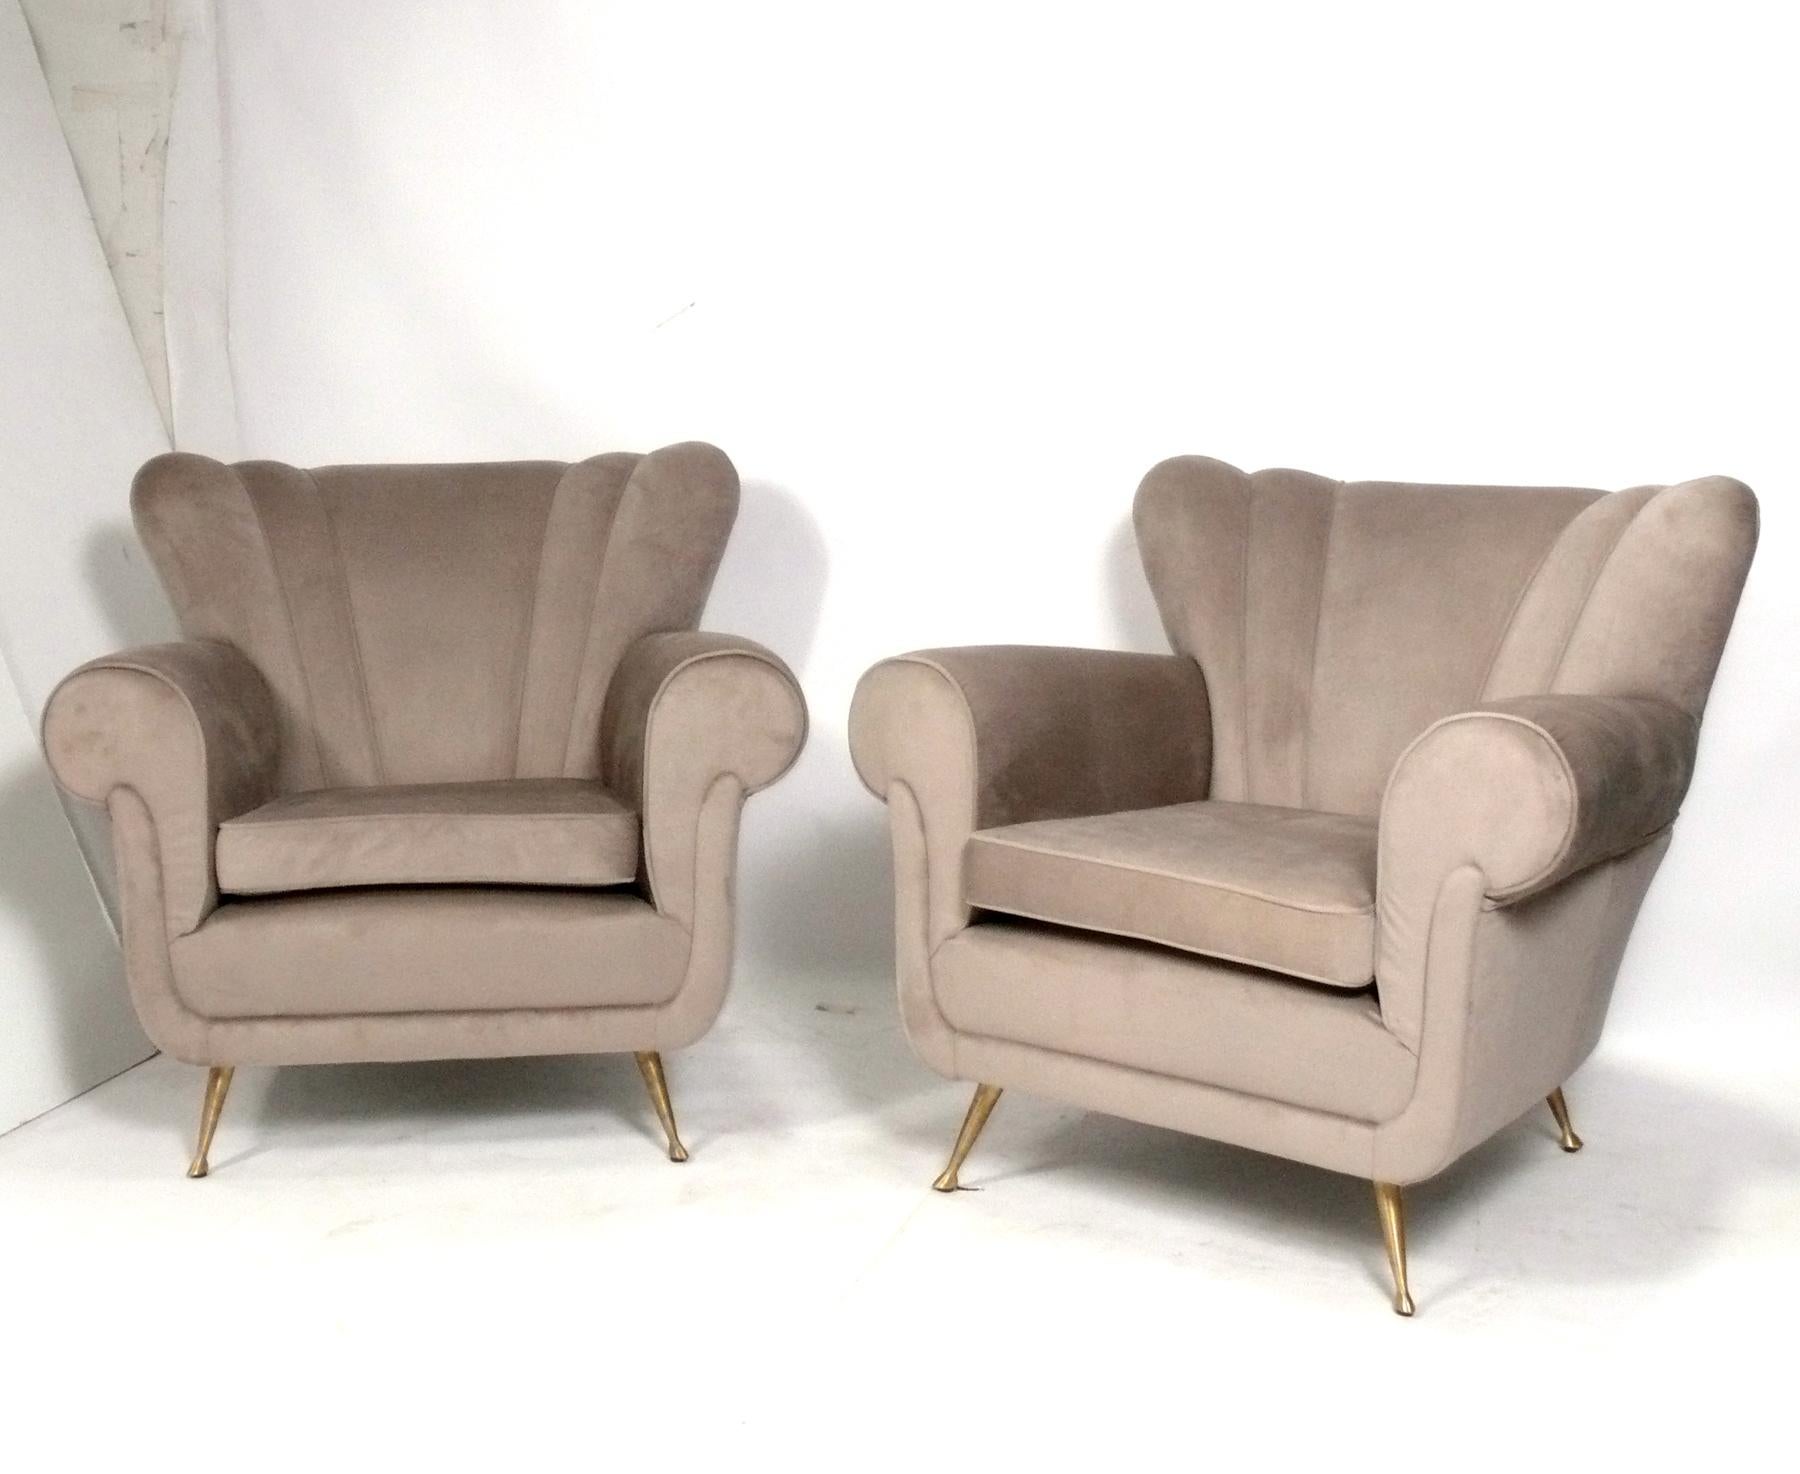 Pair of Curvaceous Italian Mid Century Style Lounge Chairs, in the style of Paolo Buffa, Italy, circa 2000s. Based on a 1950s design, these were produced in the 2000s. They look great from every angle. 